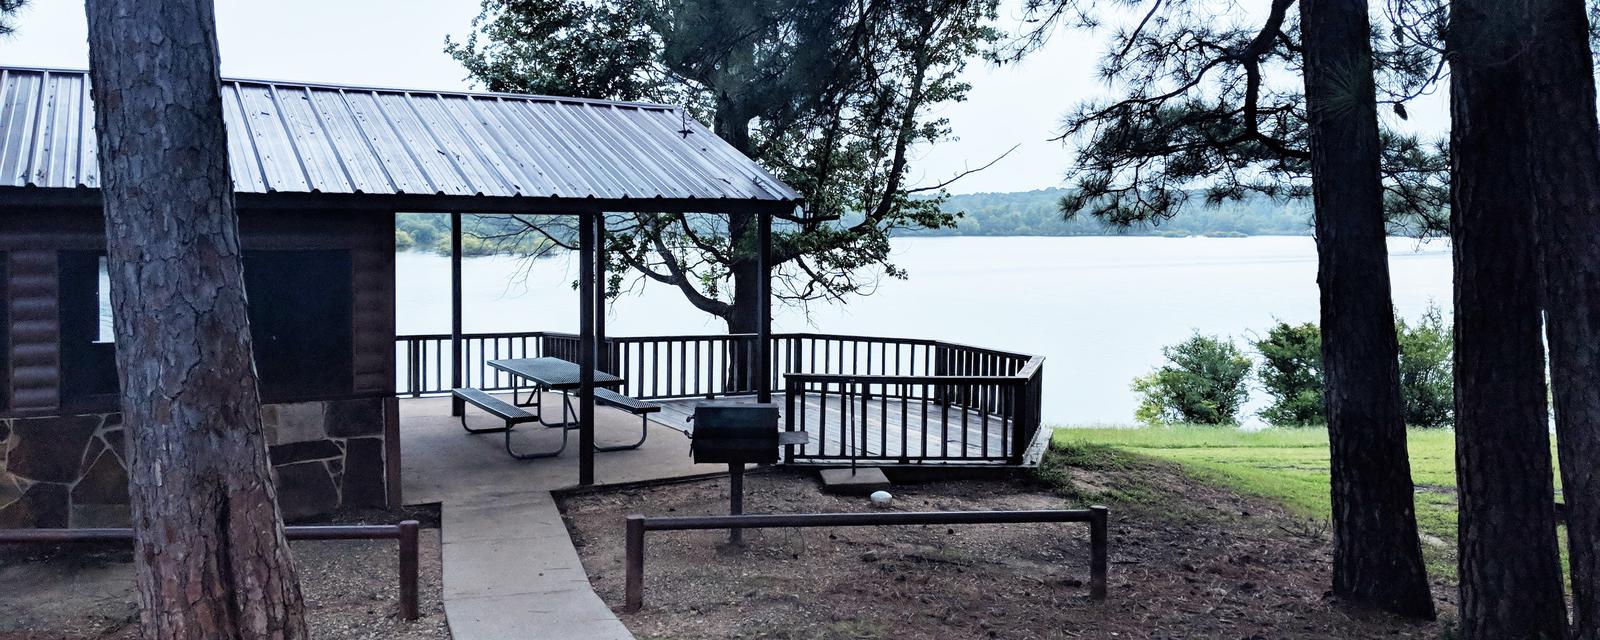 Screened shelter in Clear Springs Campground overlooking Wright Patman Lake.